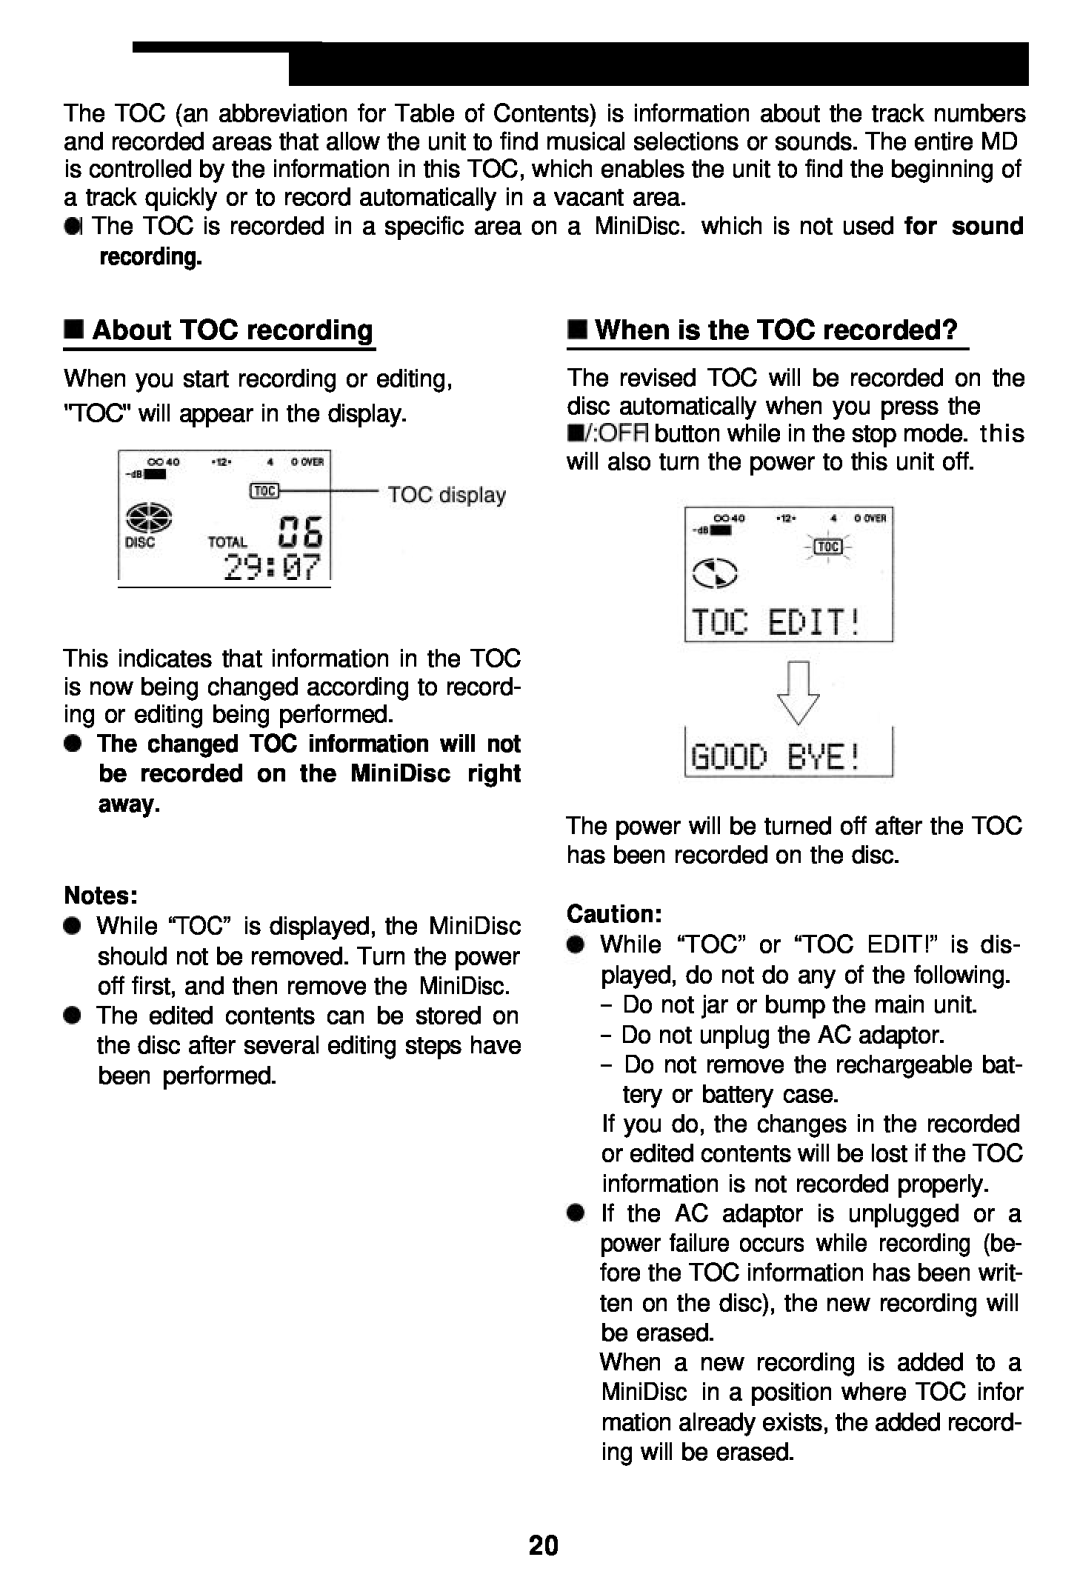 Sharp MD-MT821 manual W About TOC recording, w When is the TOC recorded? 